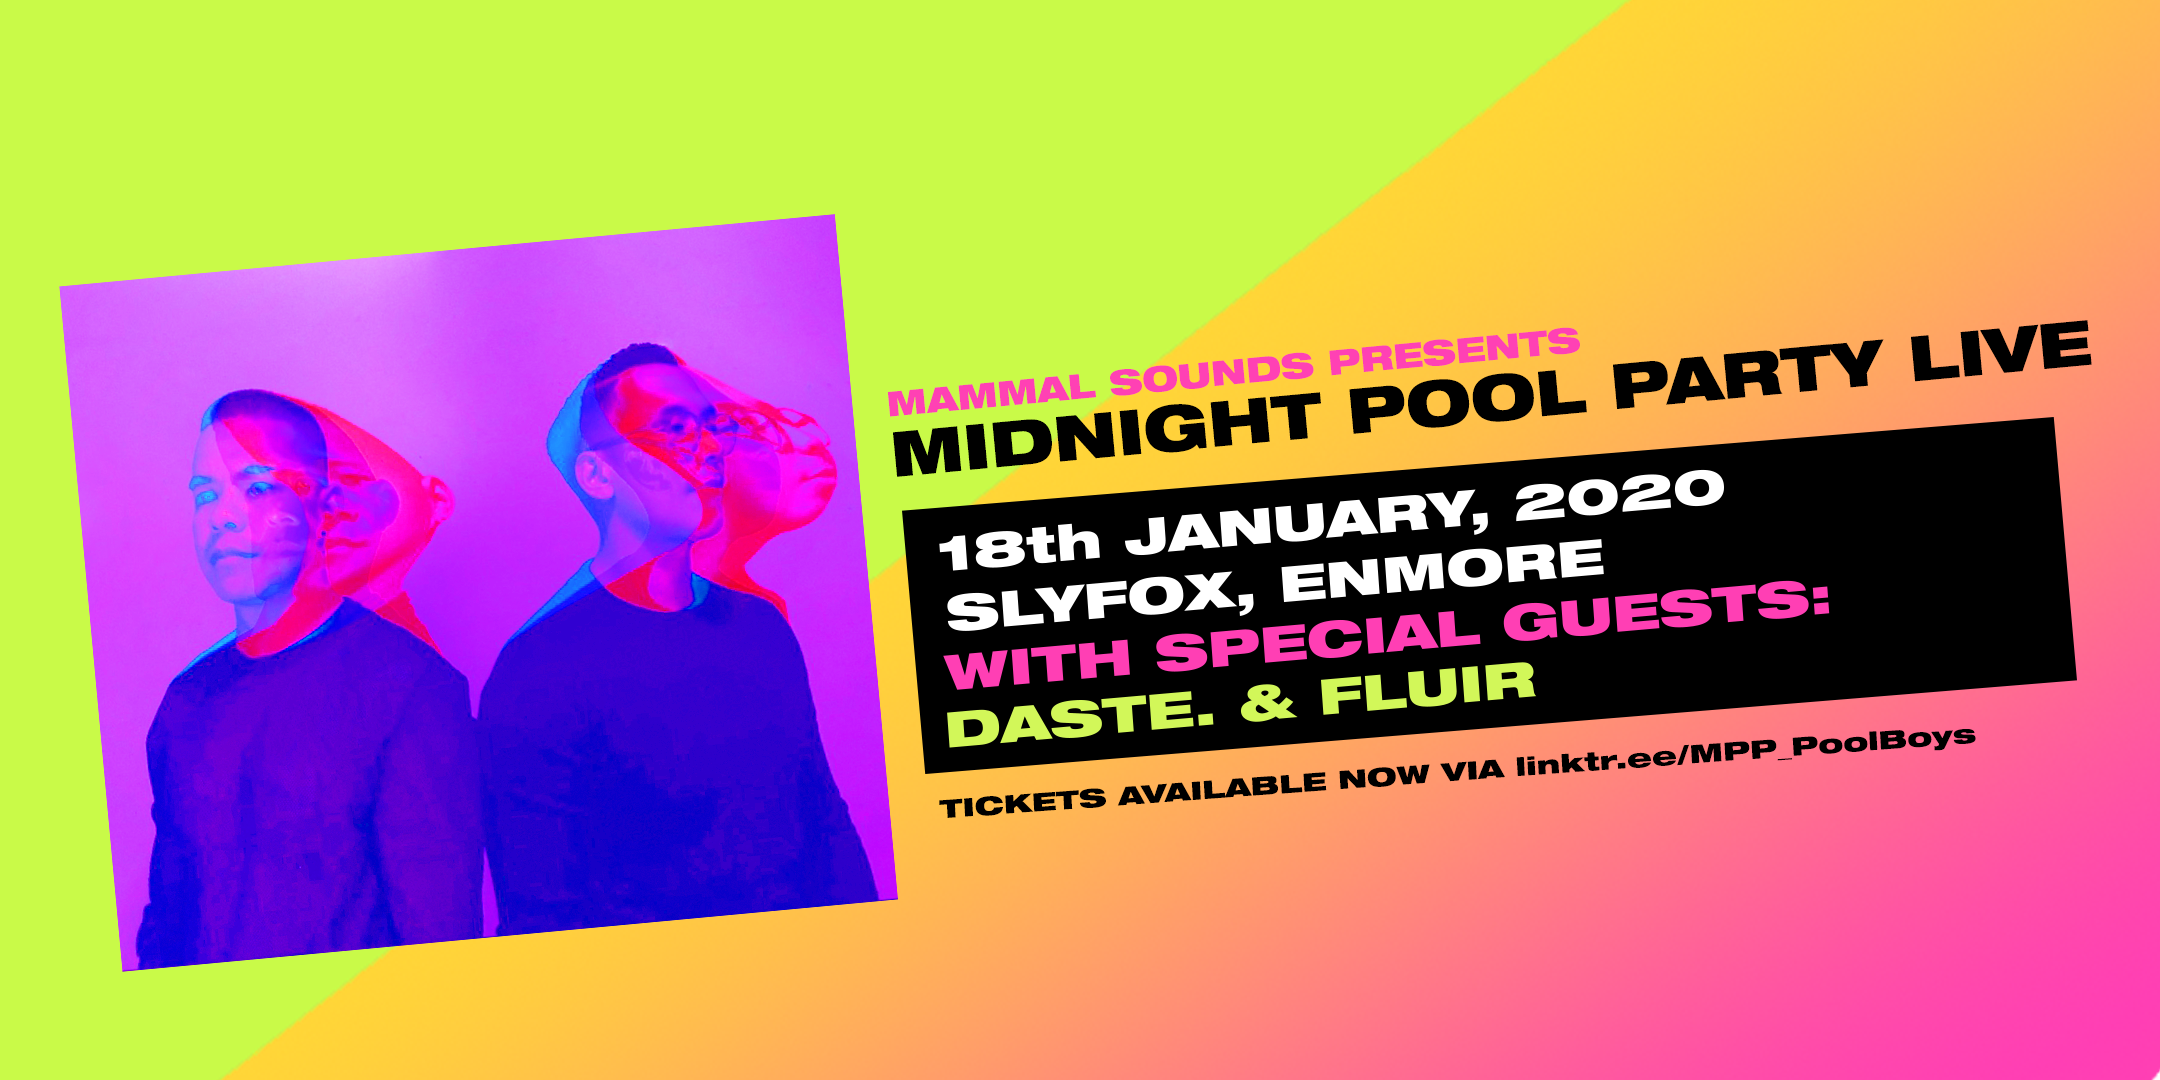 Midnight Pool Party LIVE